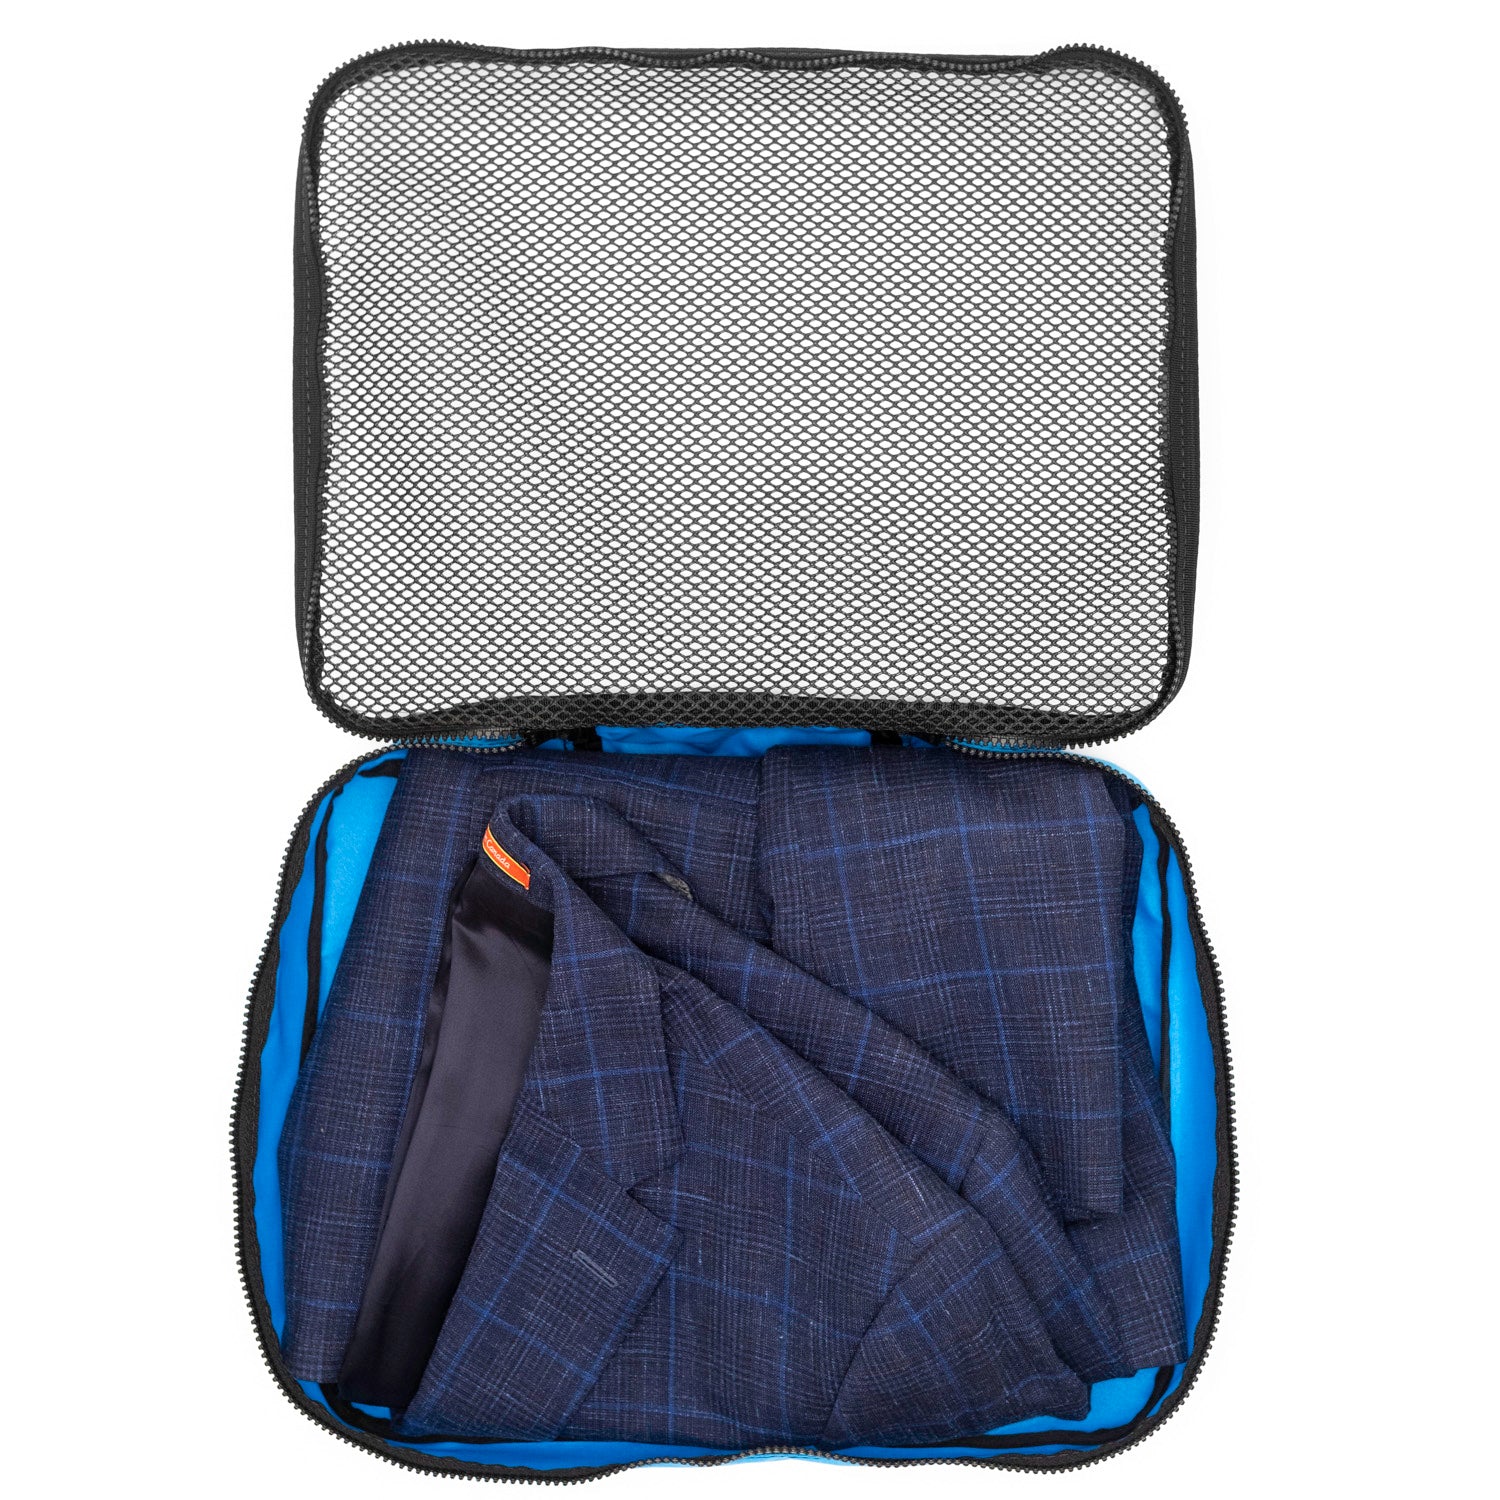 Kingfisher packing cube with sport coat.